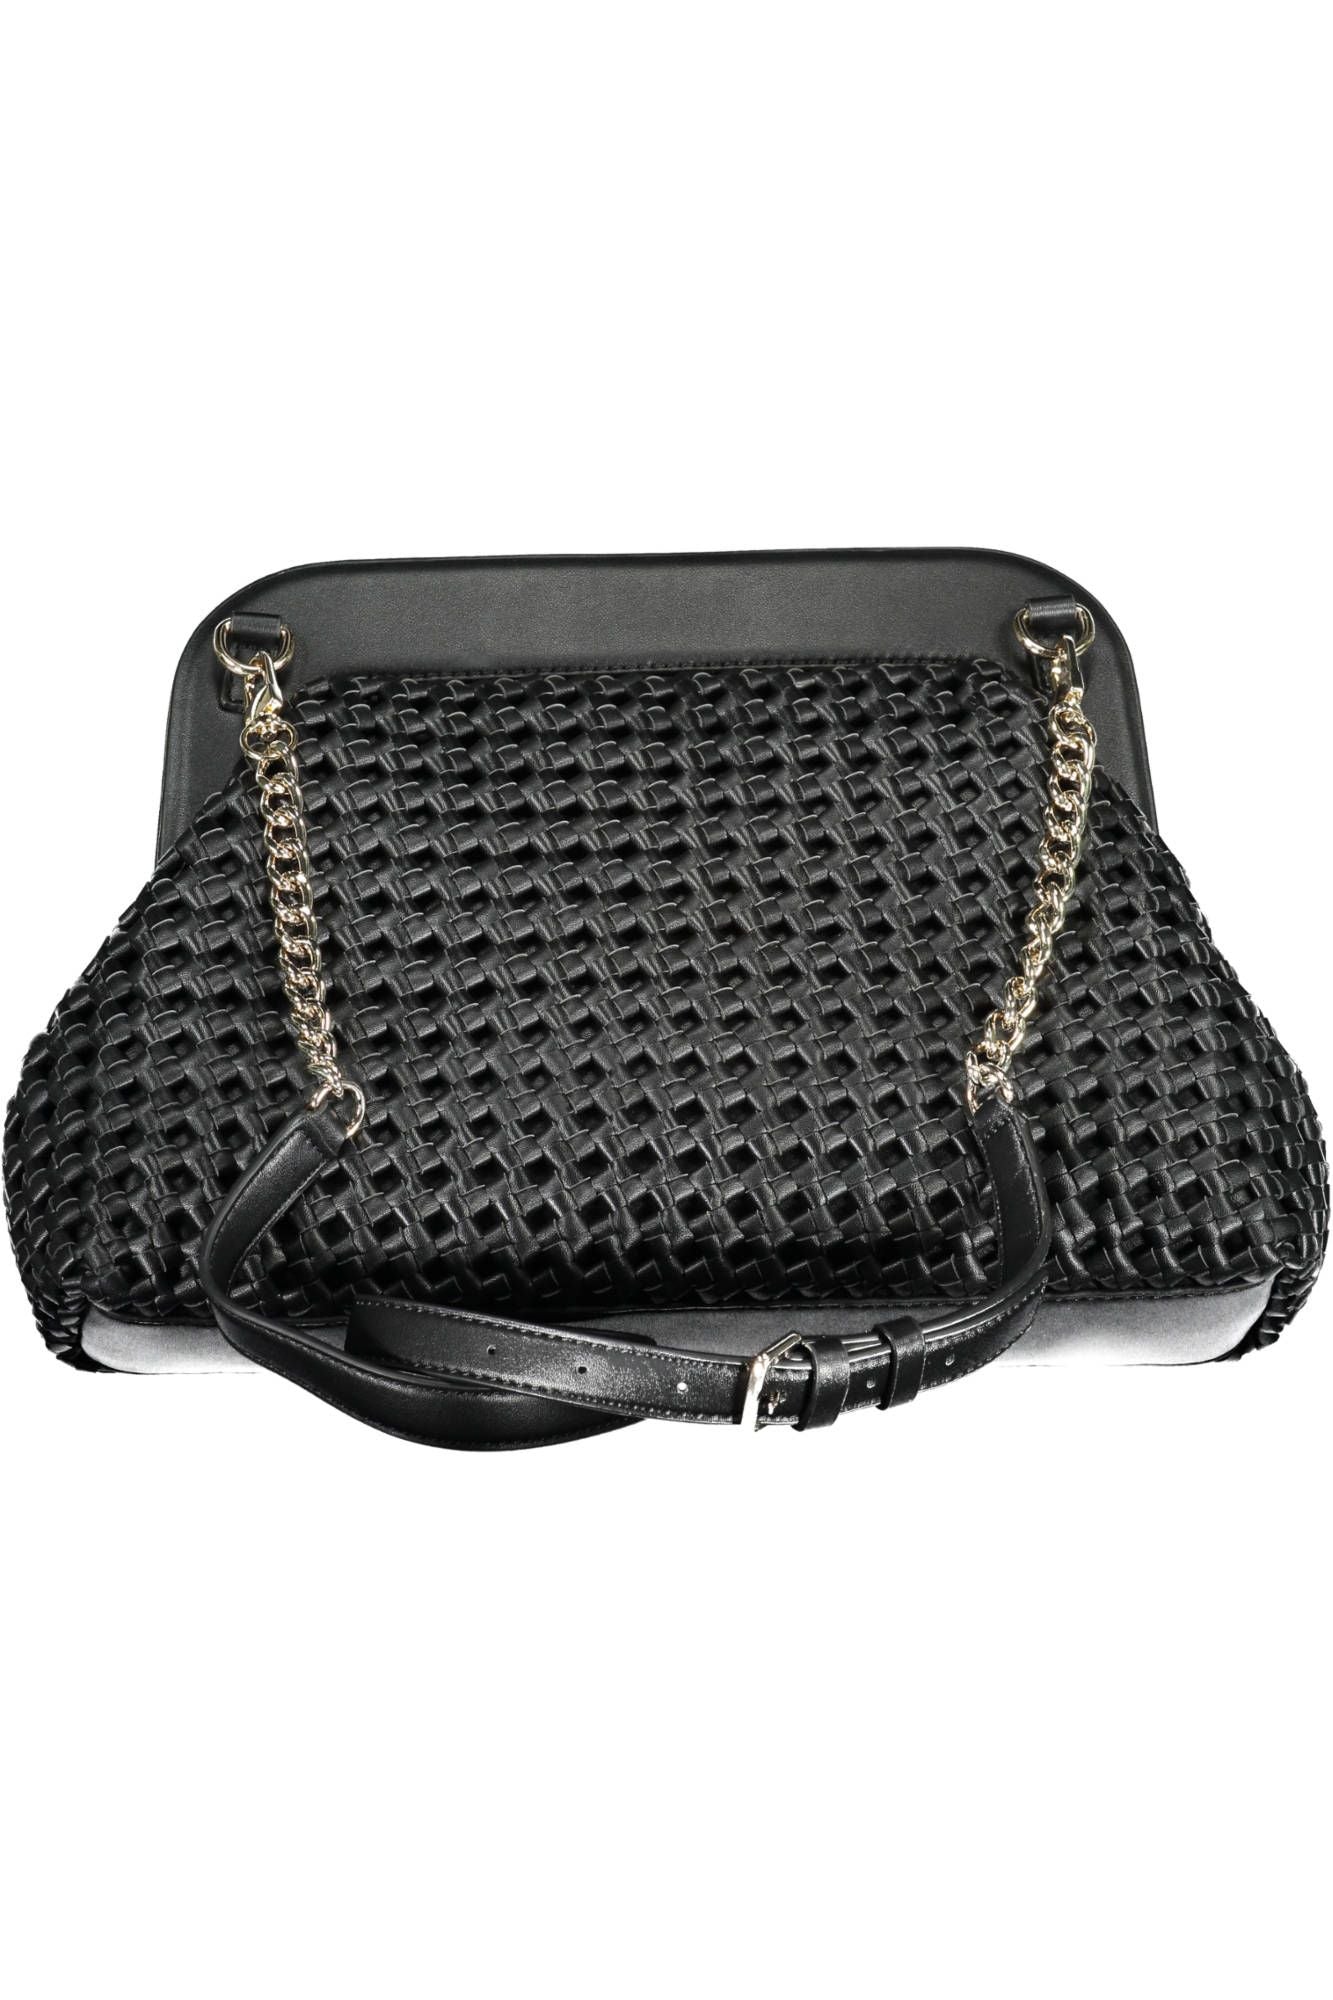 Guess Jeans Chic Black Polyurethane Satchel with Logo Detail